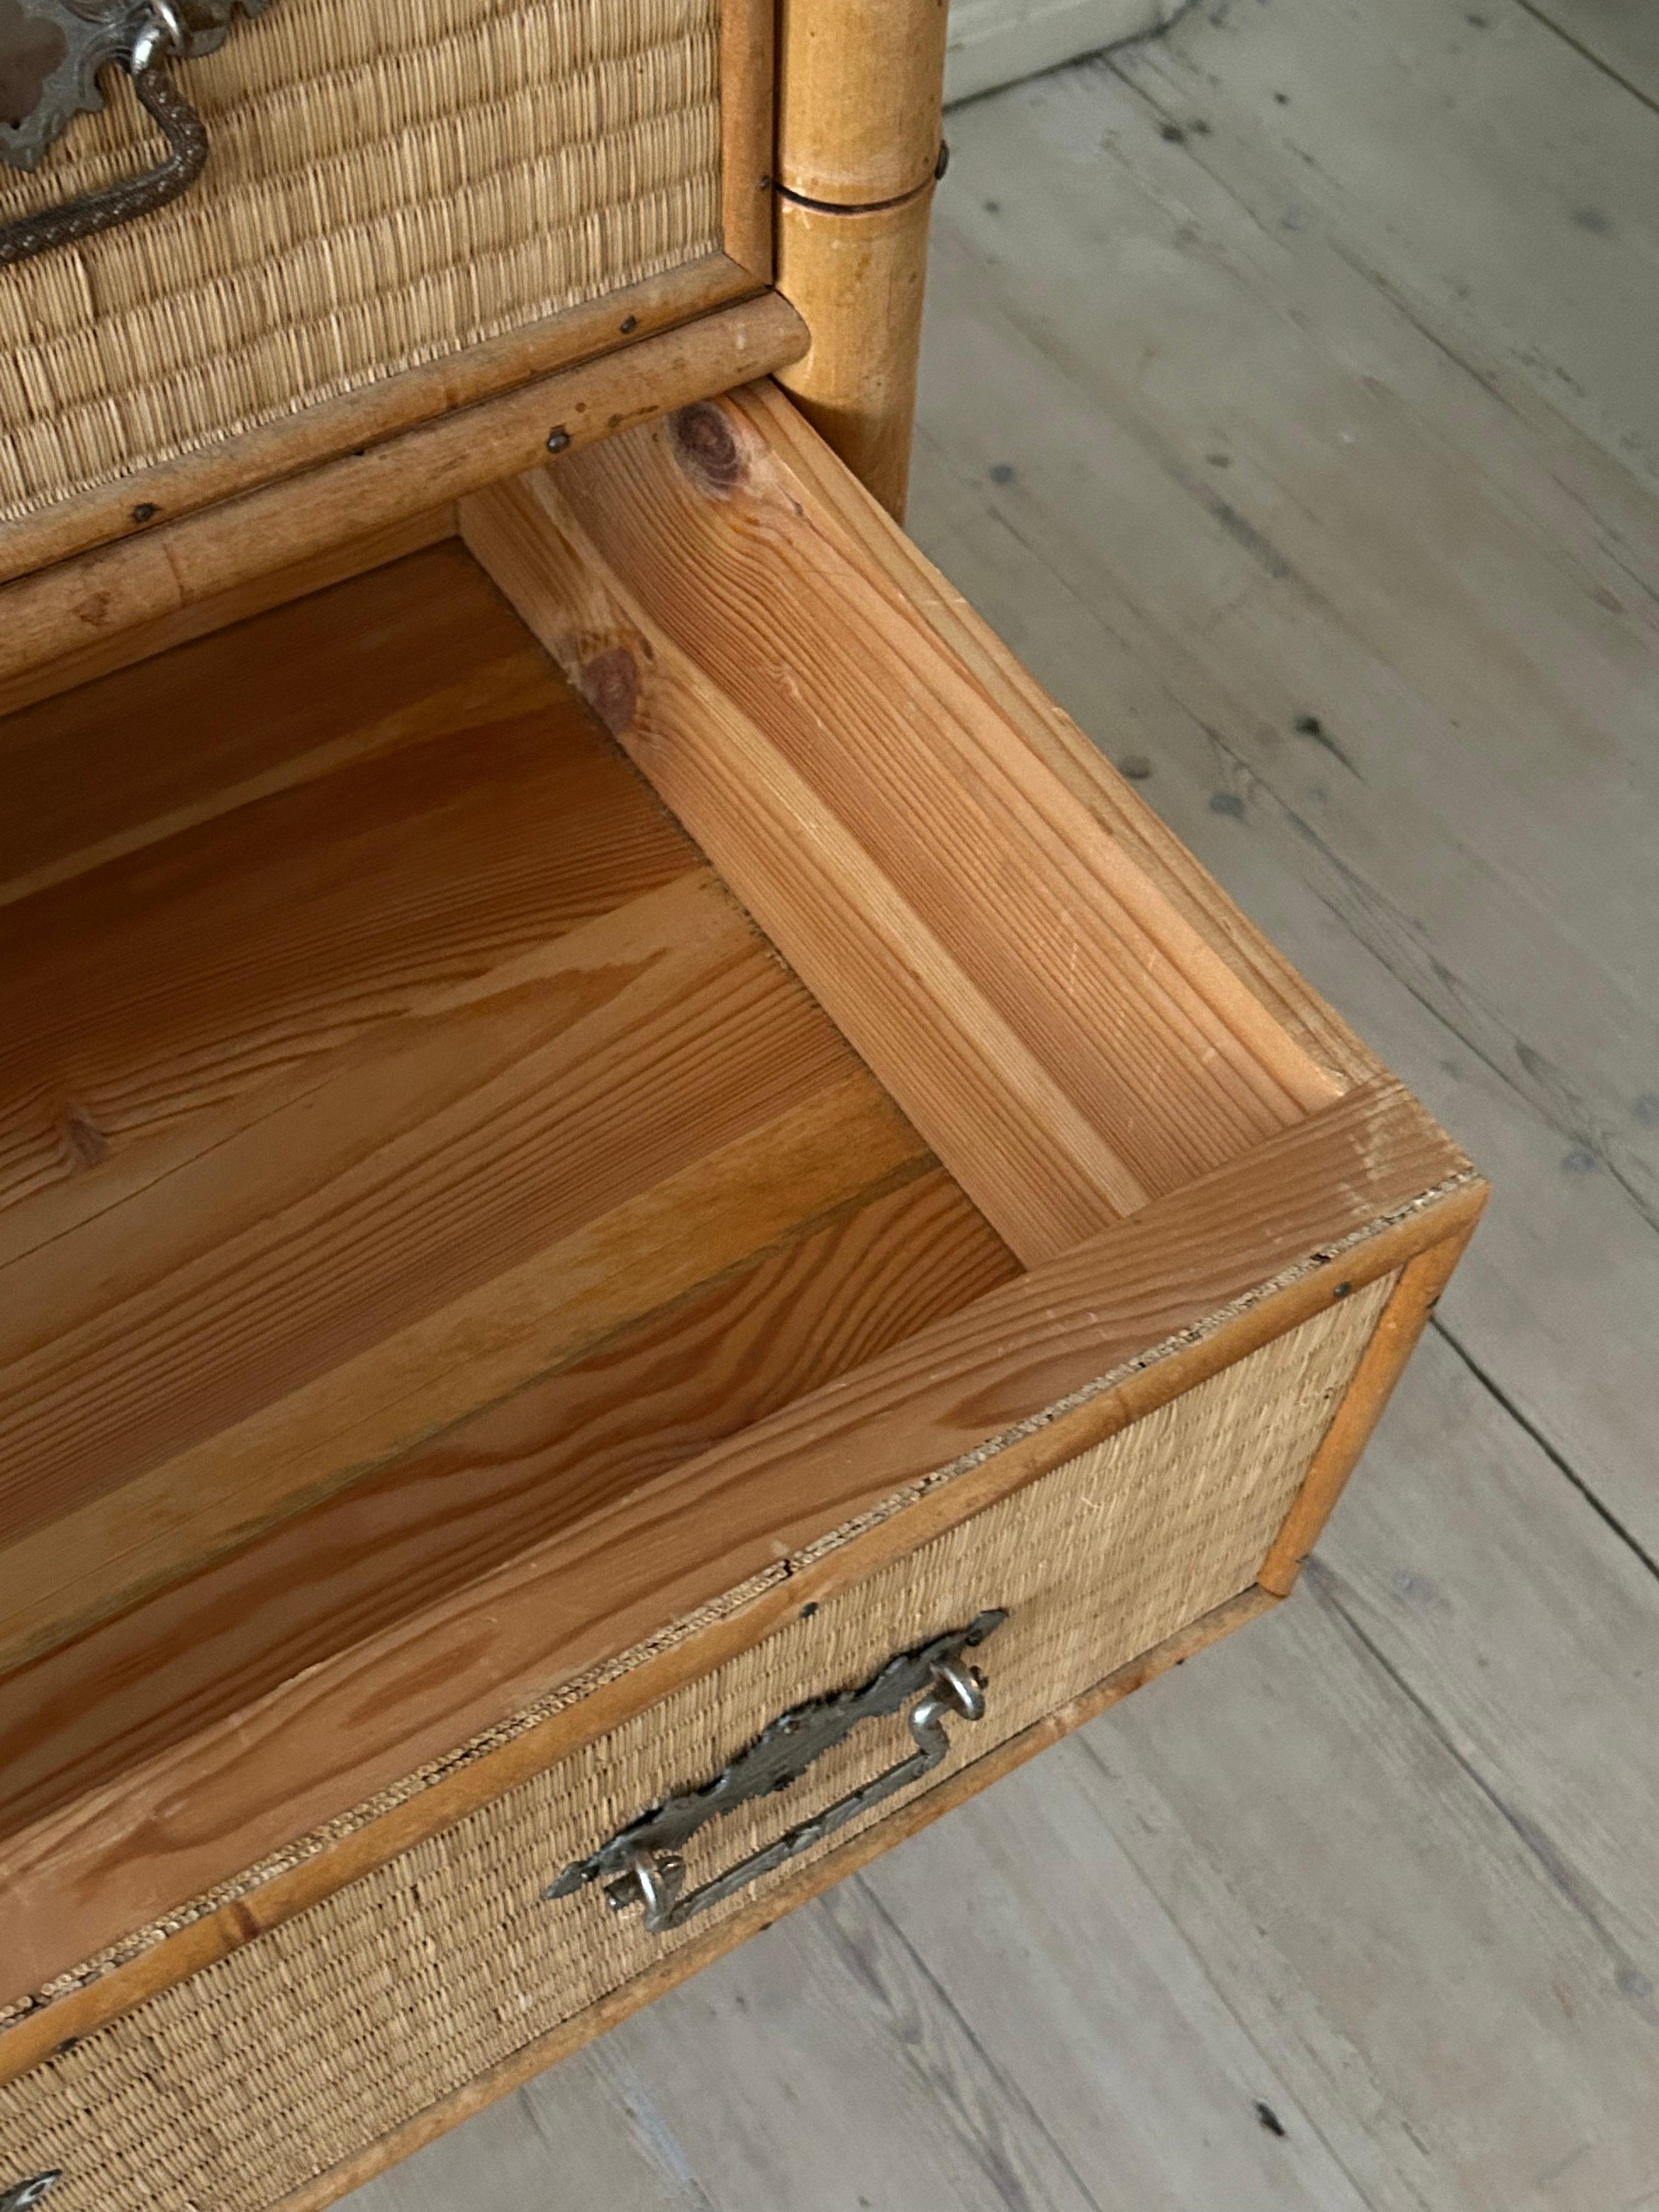 Antique Chest of Drawers in Japanese Straw and Beech Wood, Sweden, 19th Century For Sale 11